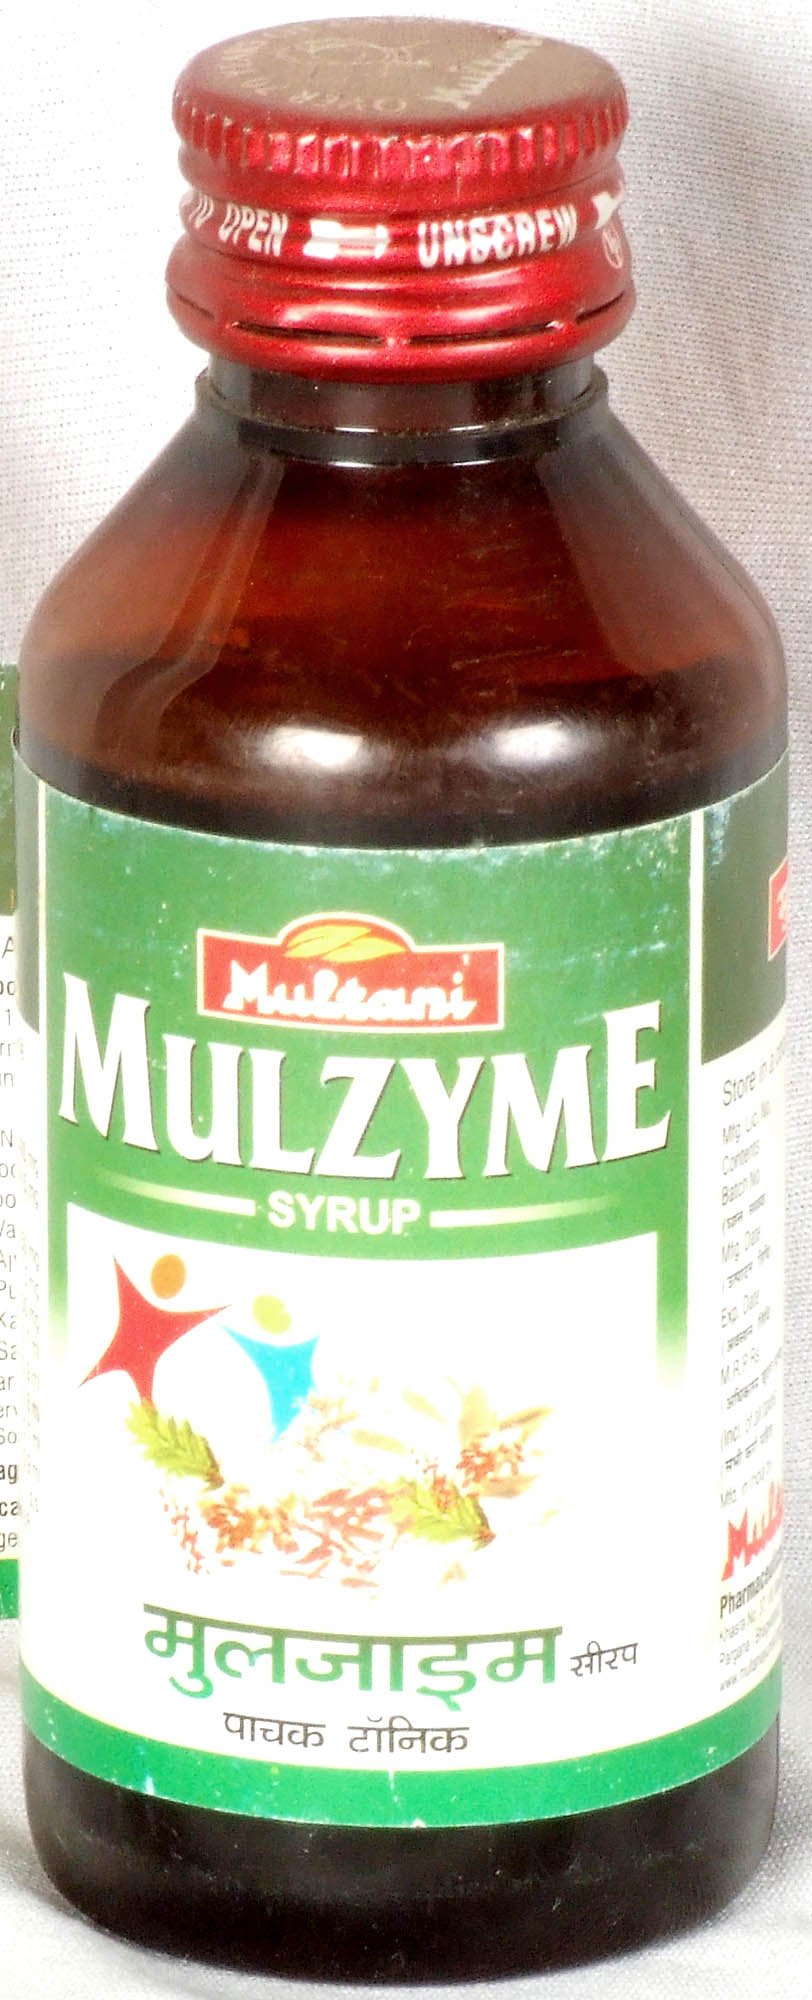 Mulzyme Syrup - book cover